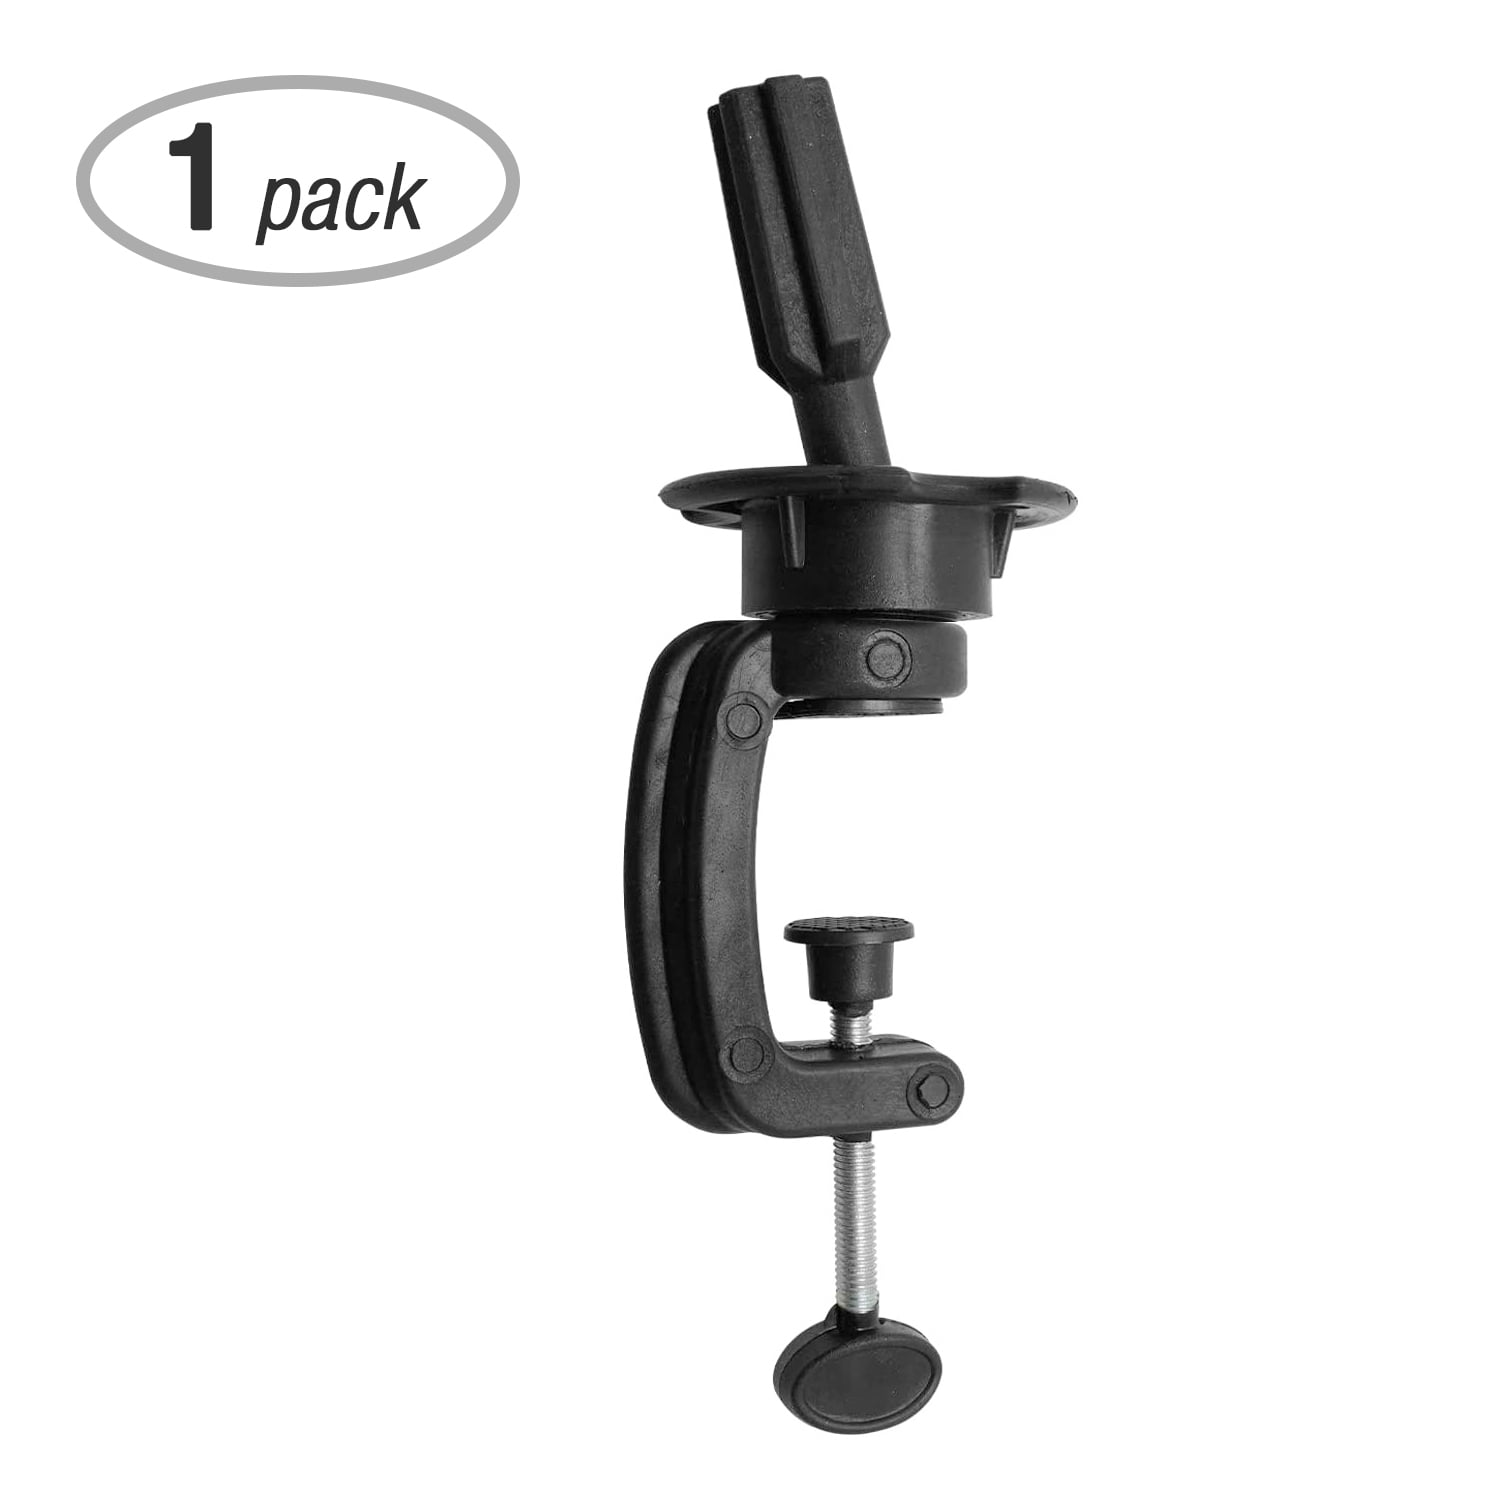 PARTYSAVING Mannequin Head Stand Clamp for Wig Making, 1 Pack